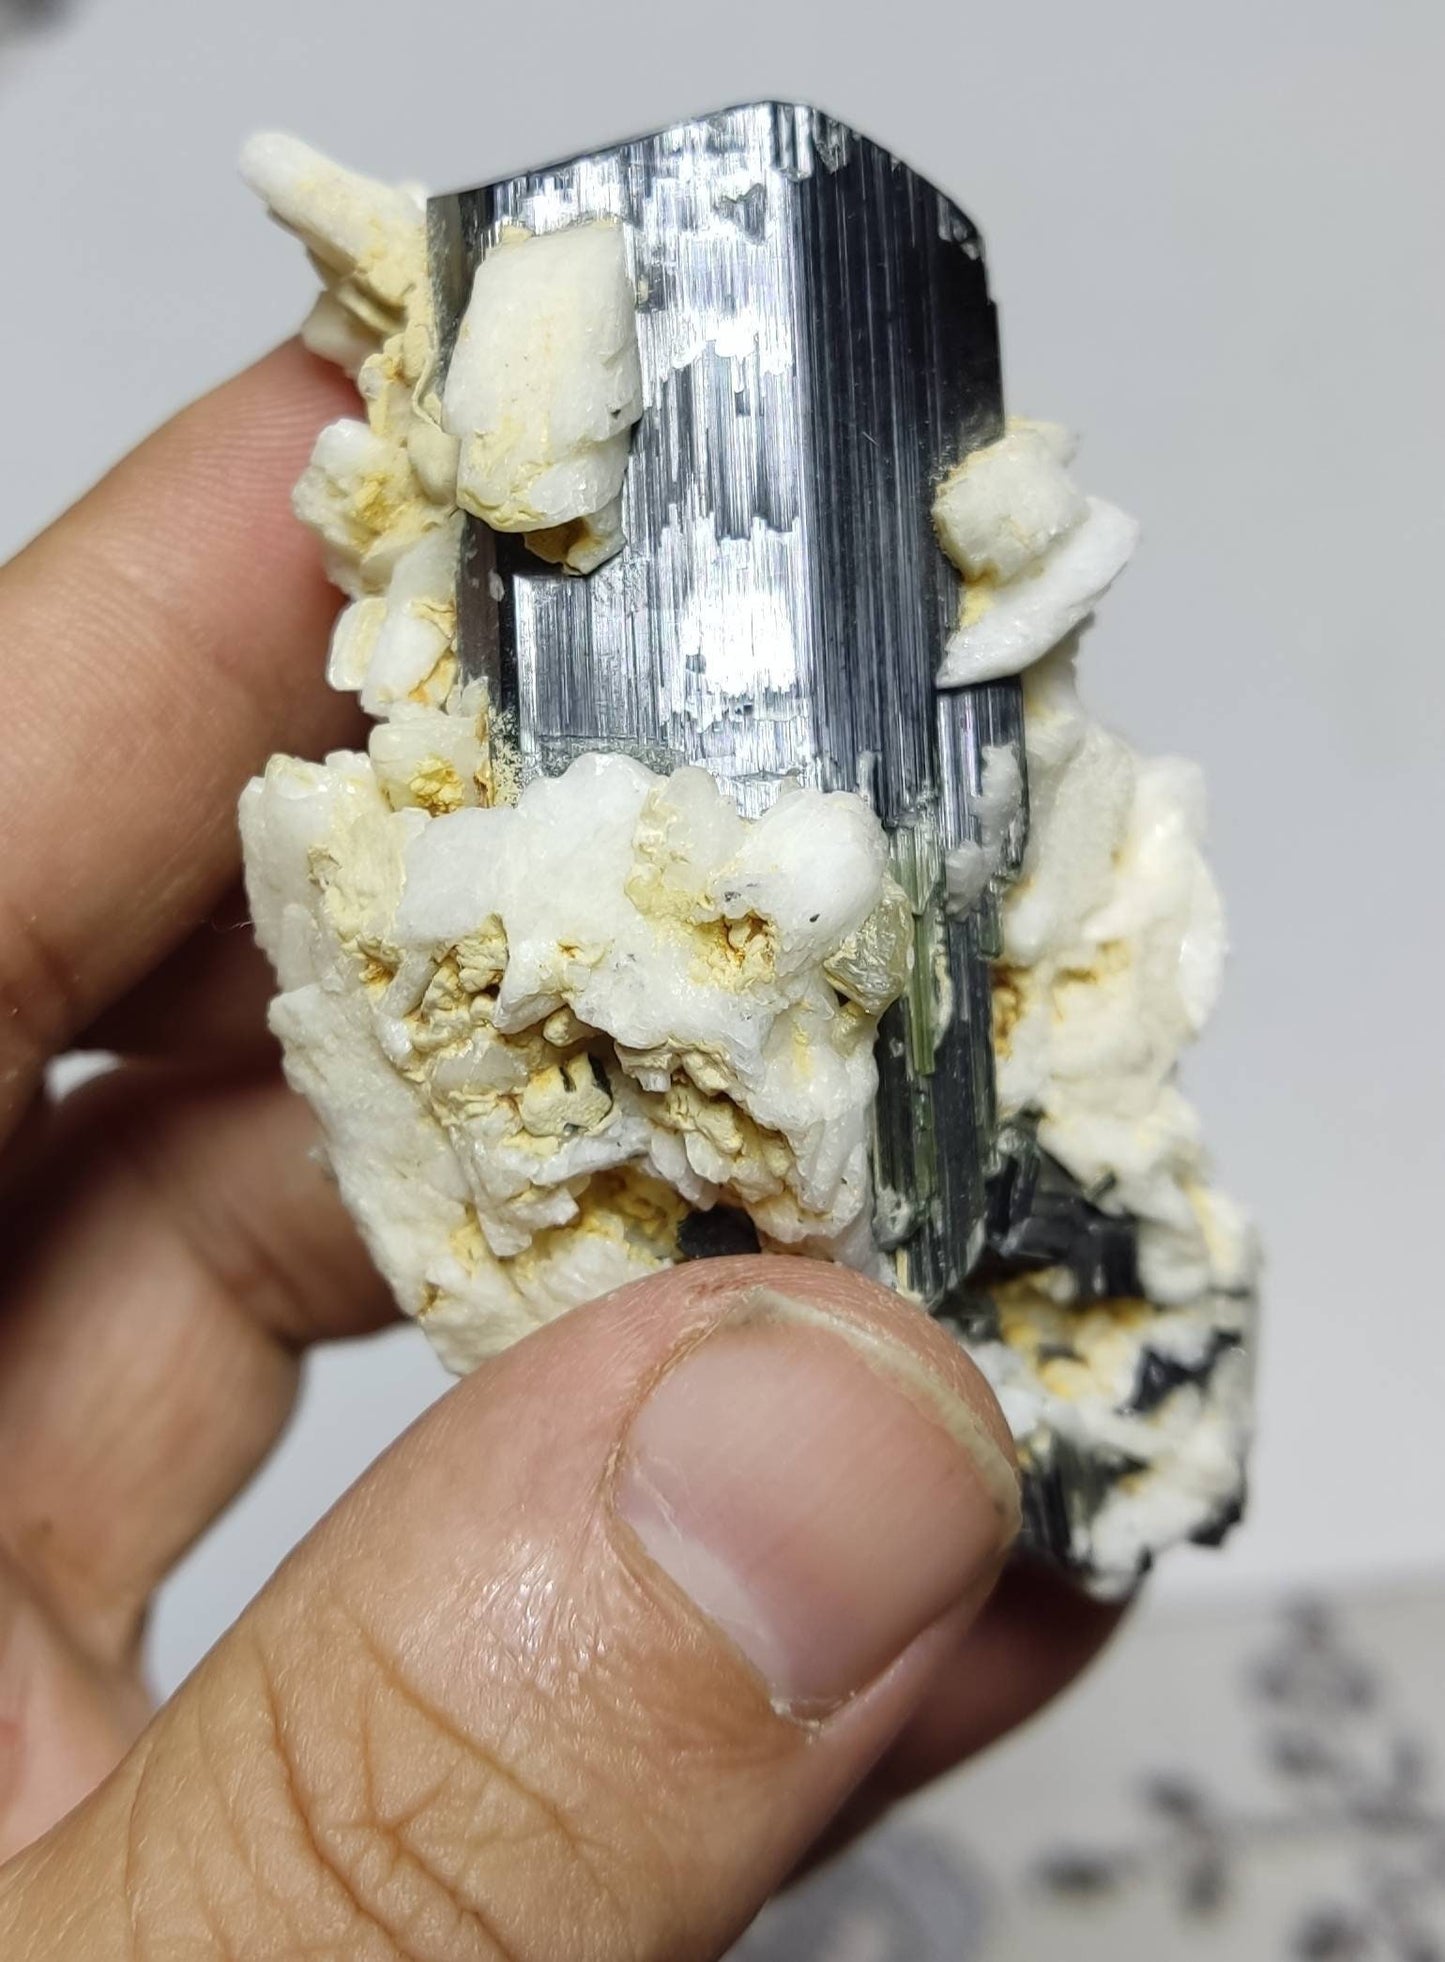 An Aesthetic specimen of Natural Tourmaline crystal with Albite and some muscovite 126 grams